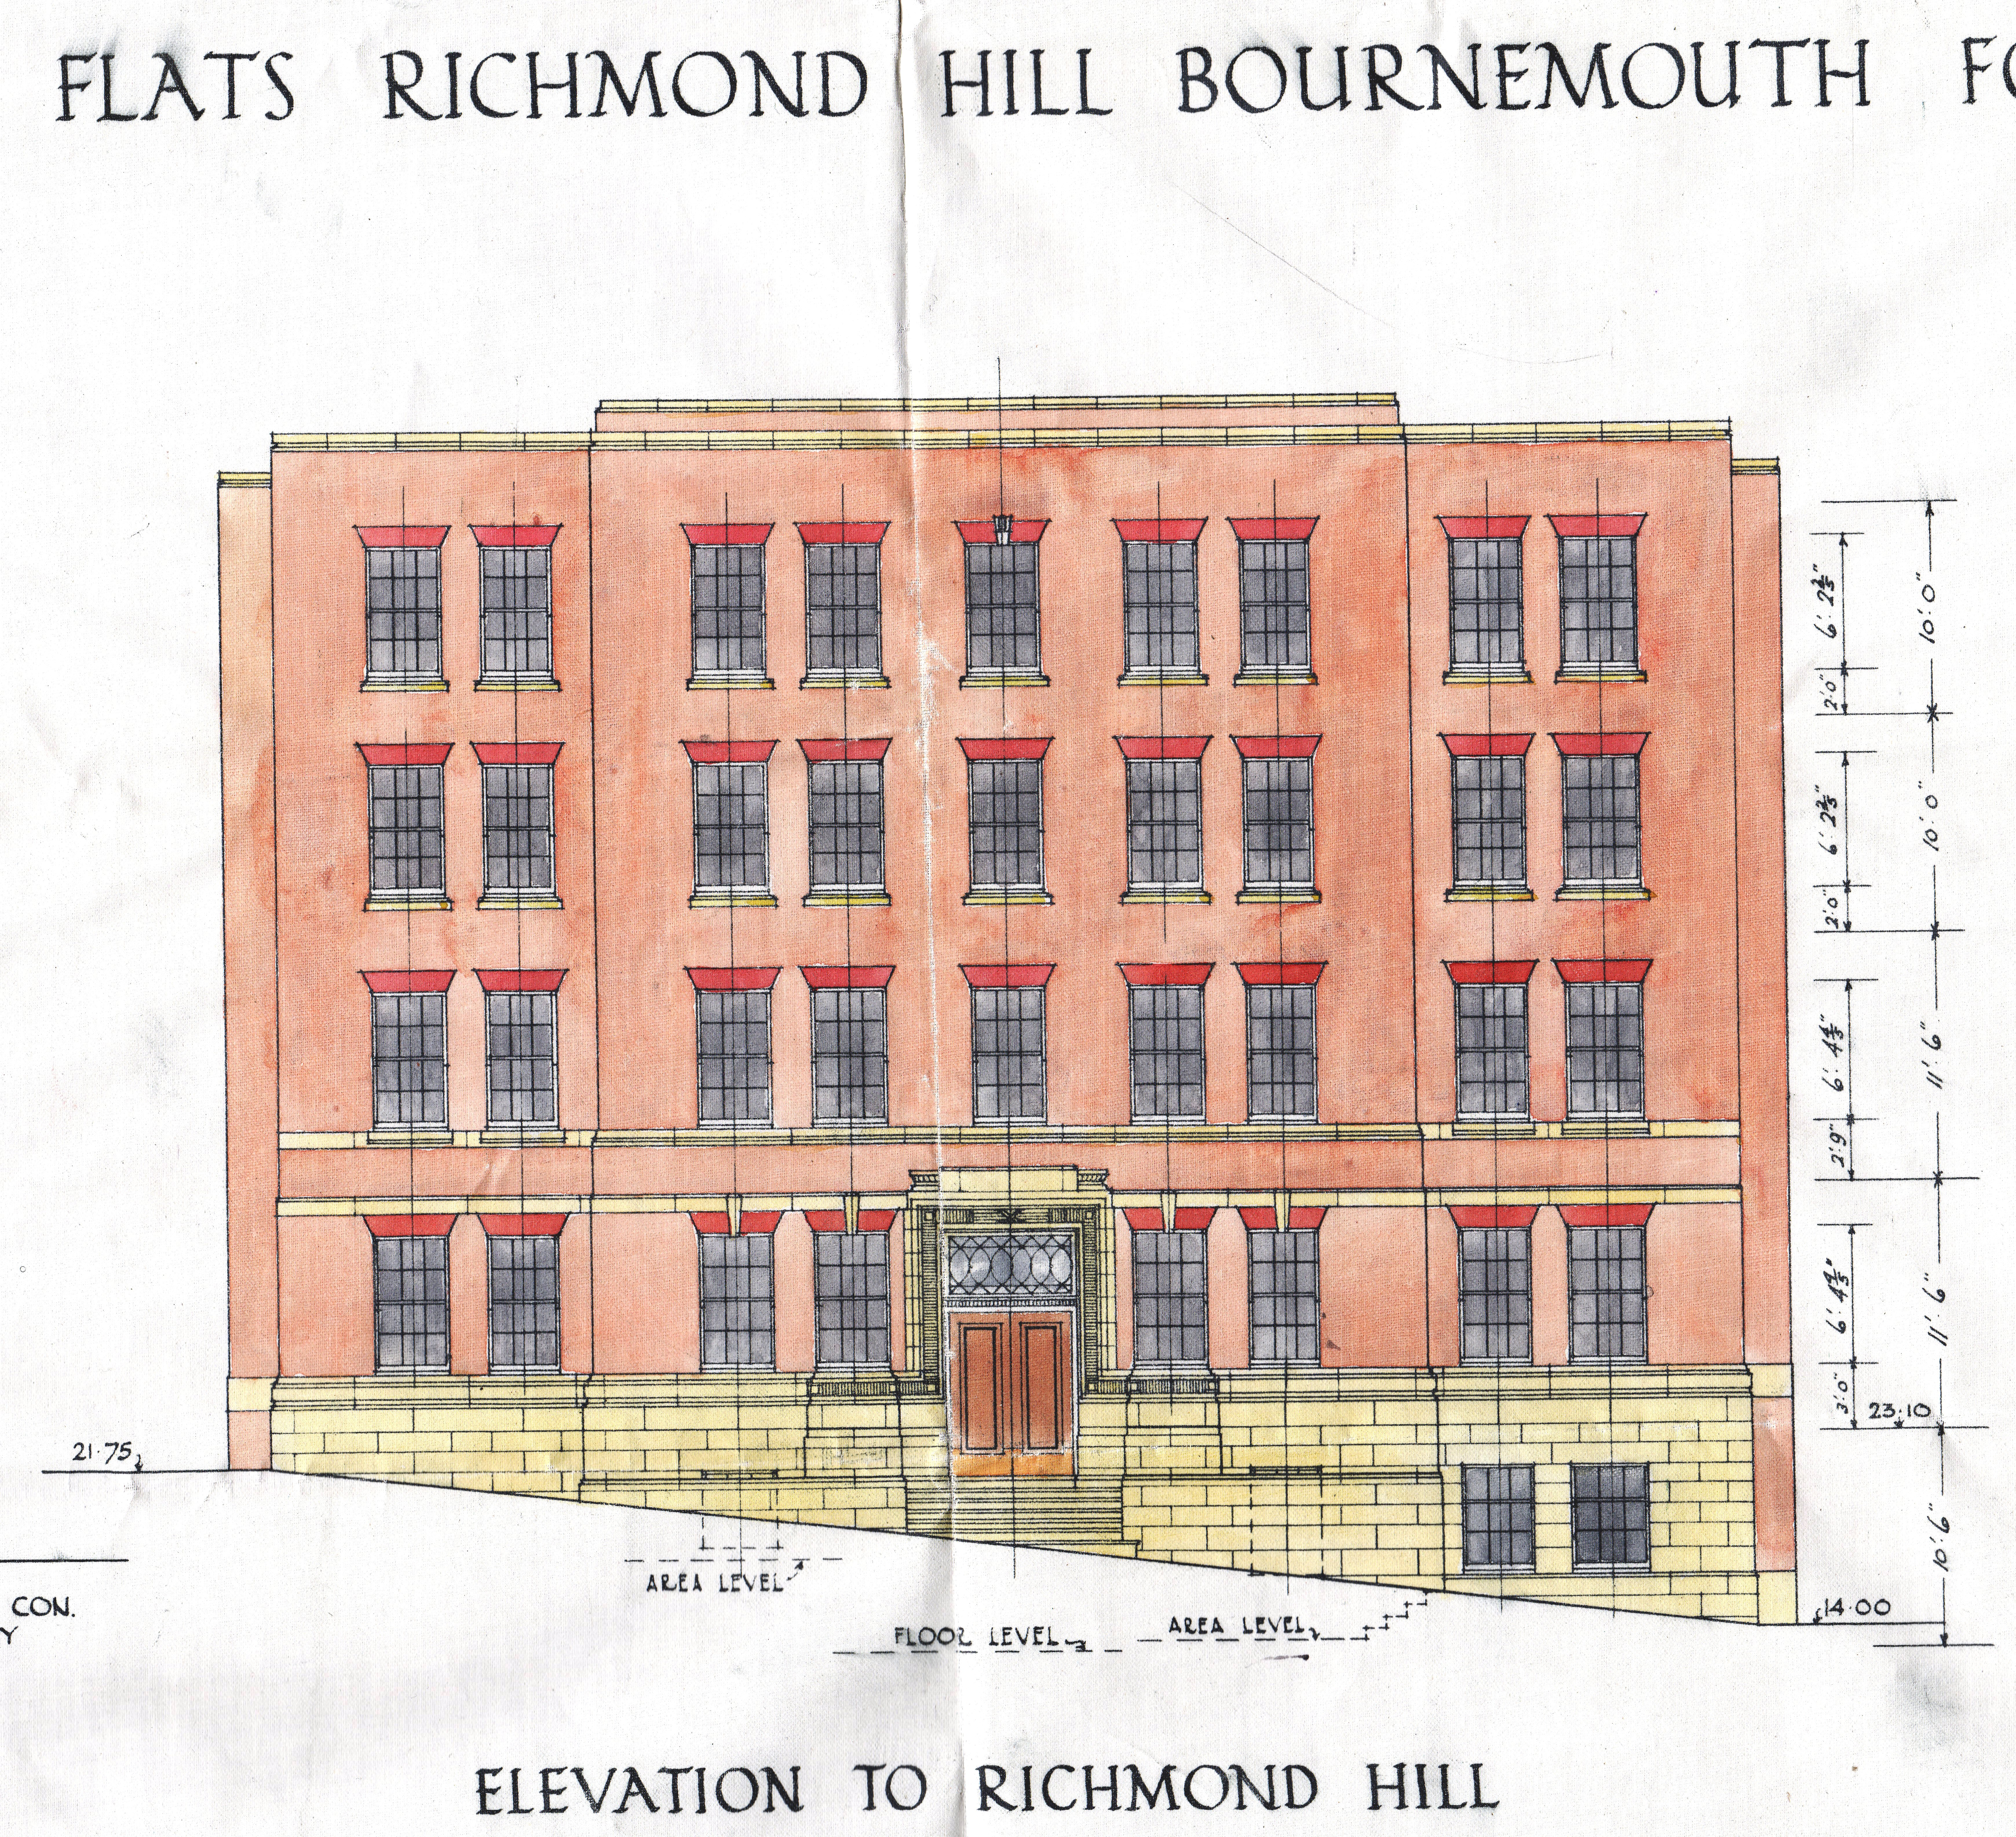 Plan for a block of offices and flats on Richmond Hill, 1932